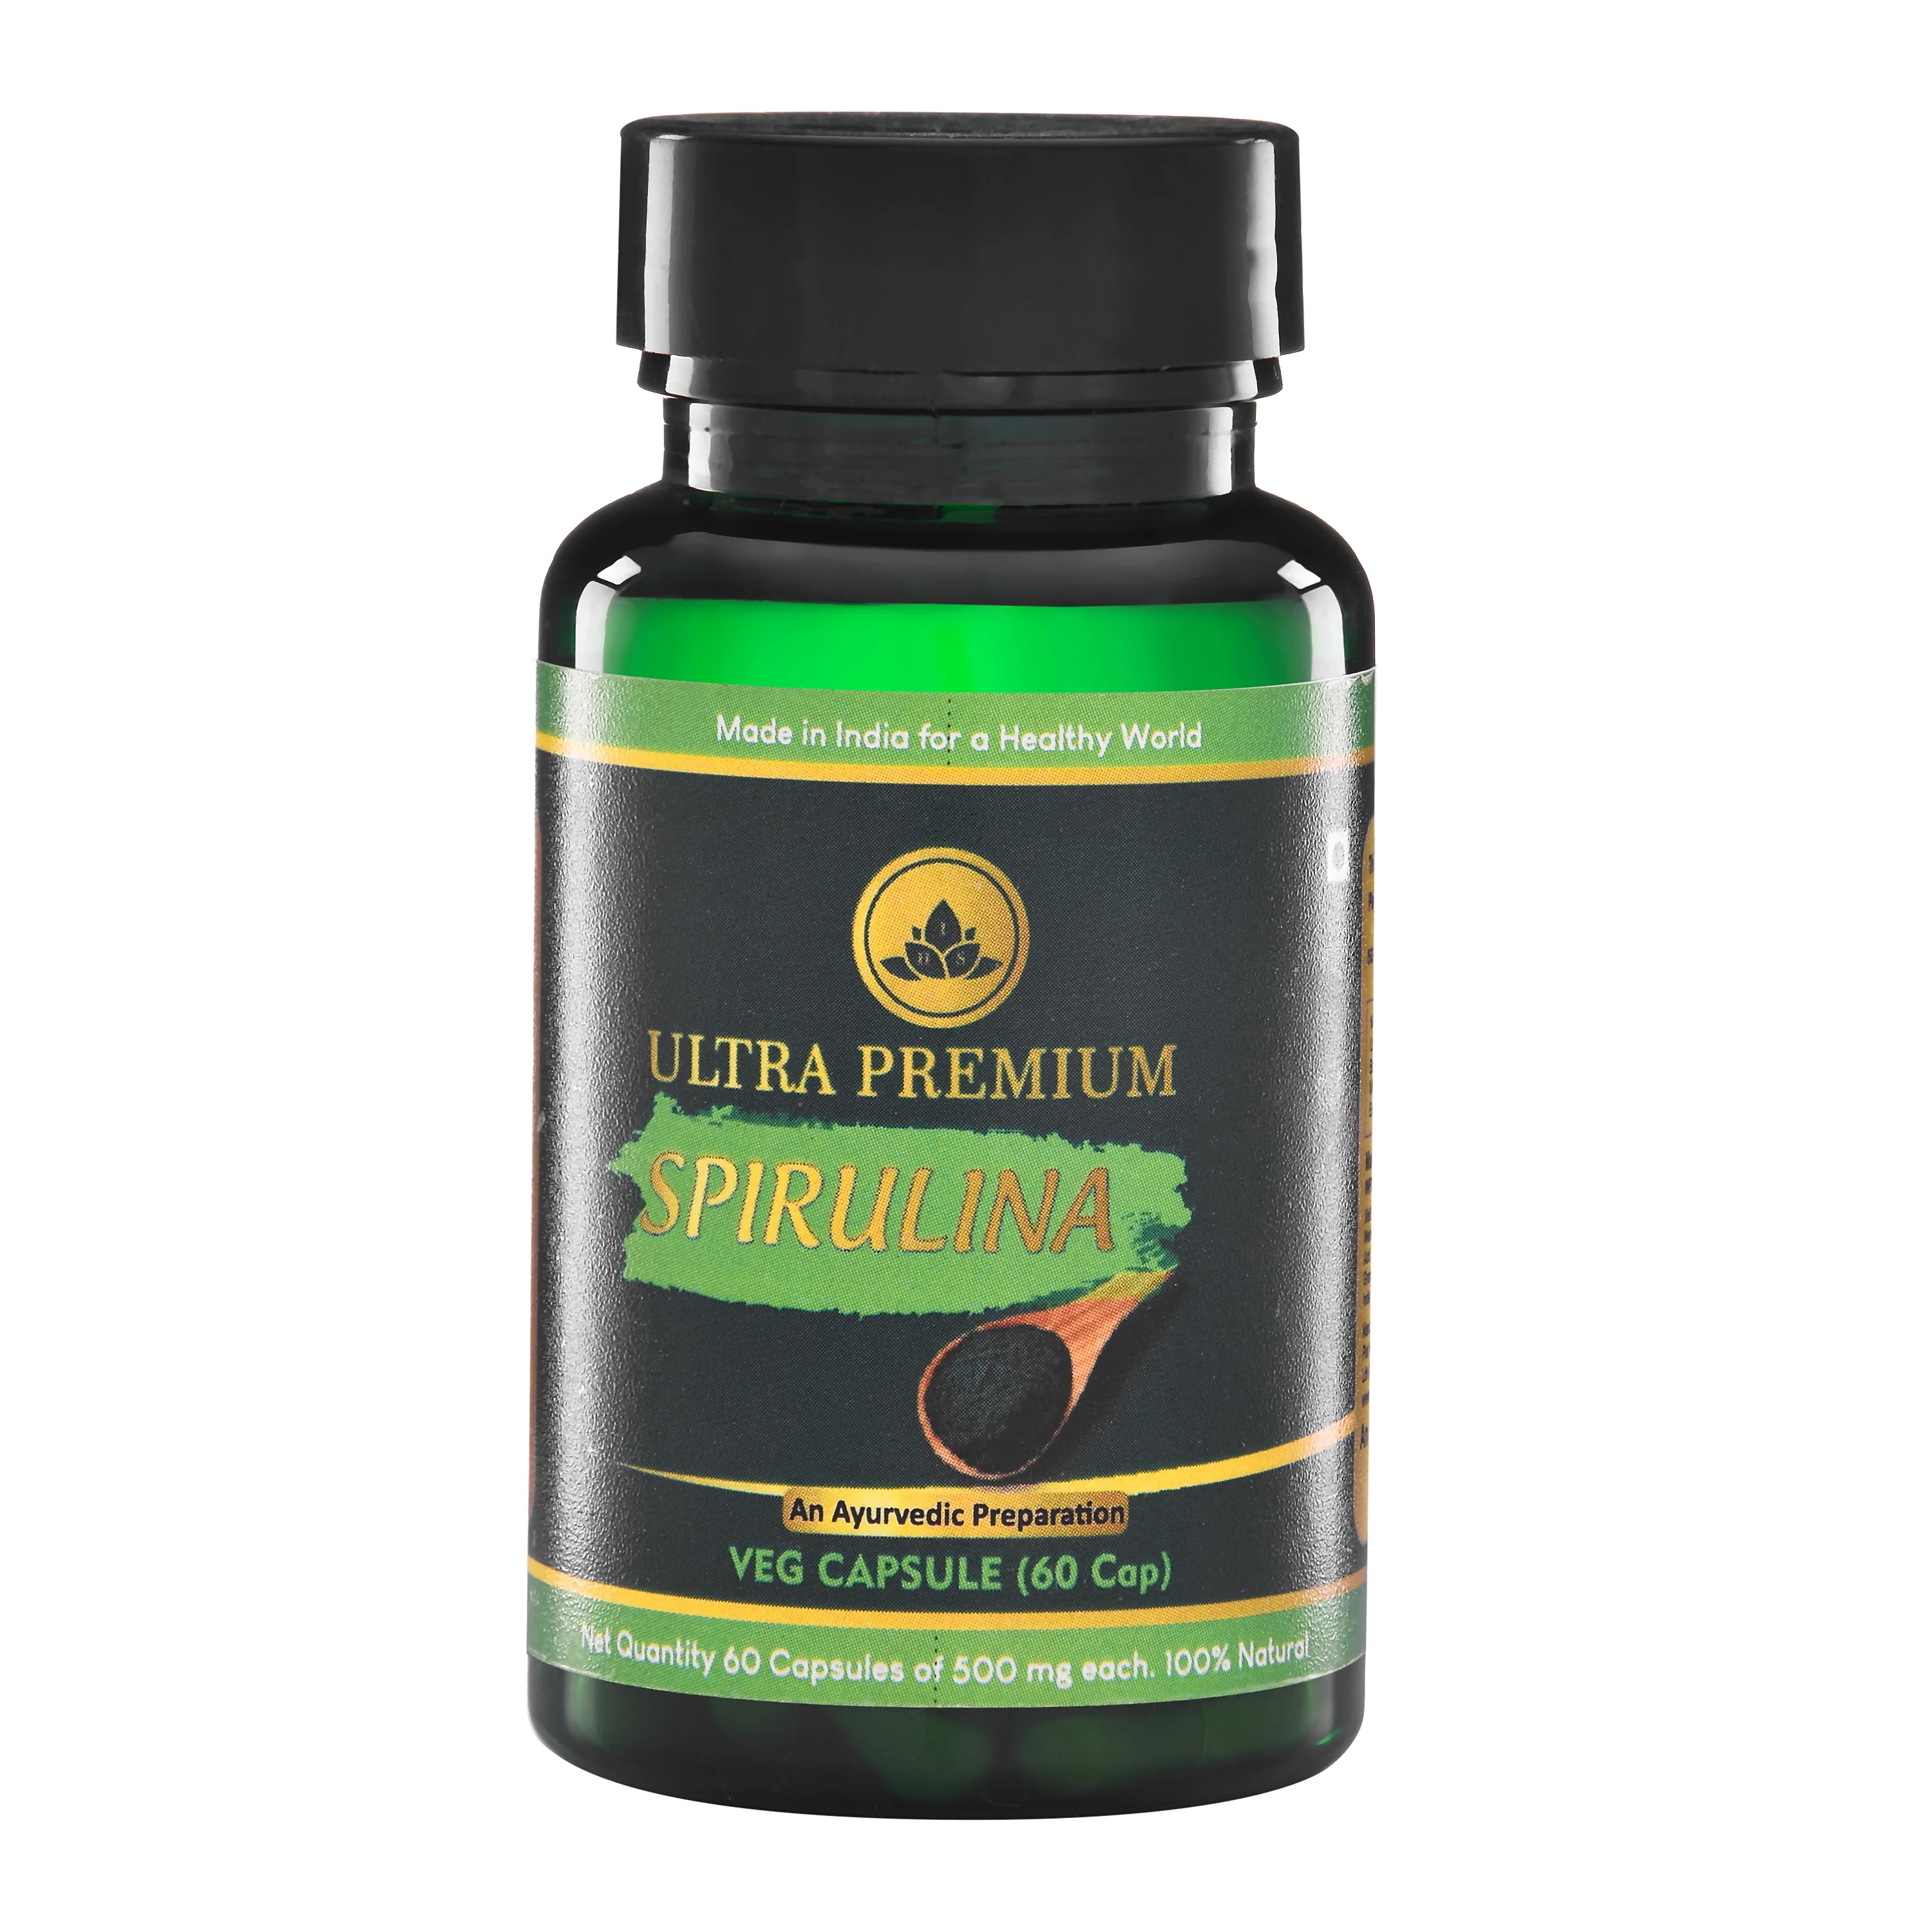 Spirulina Herbs For Stamina And Energy